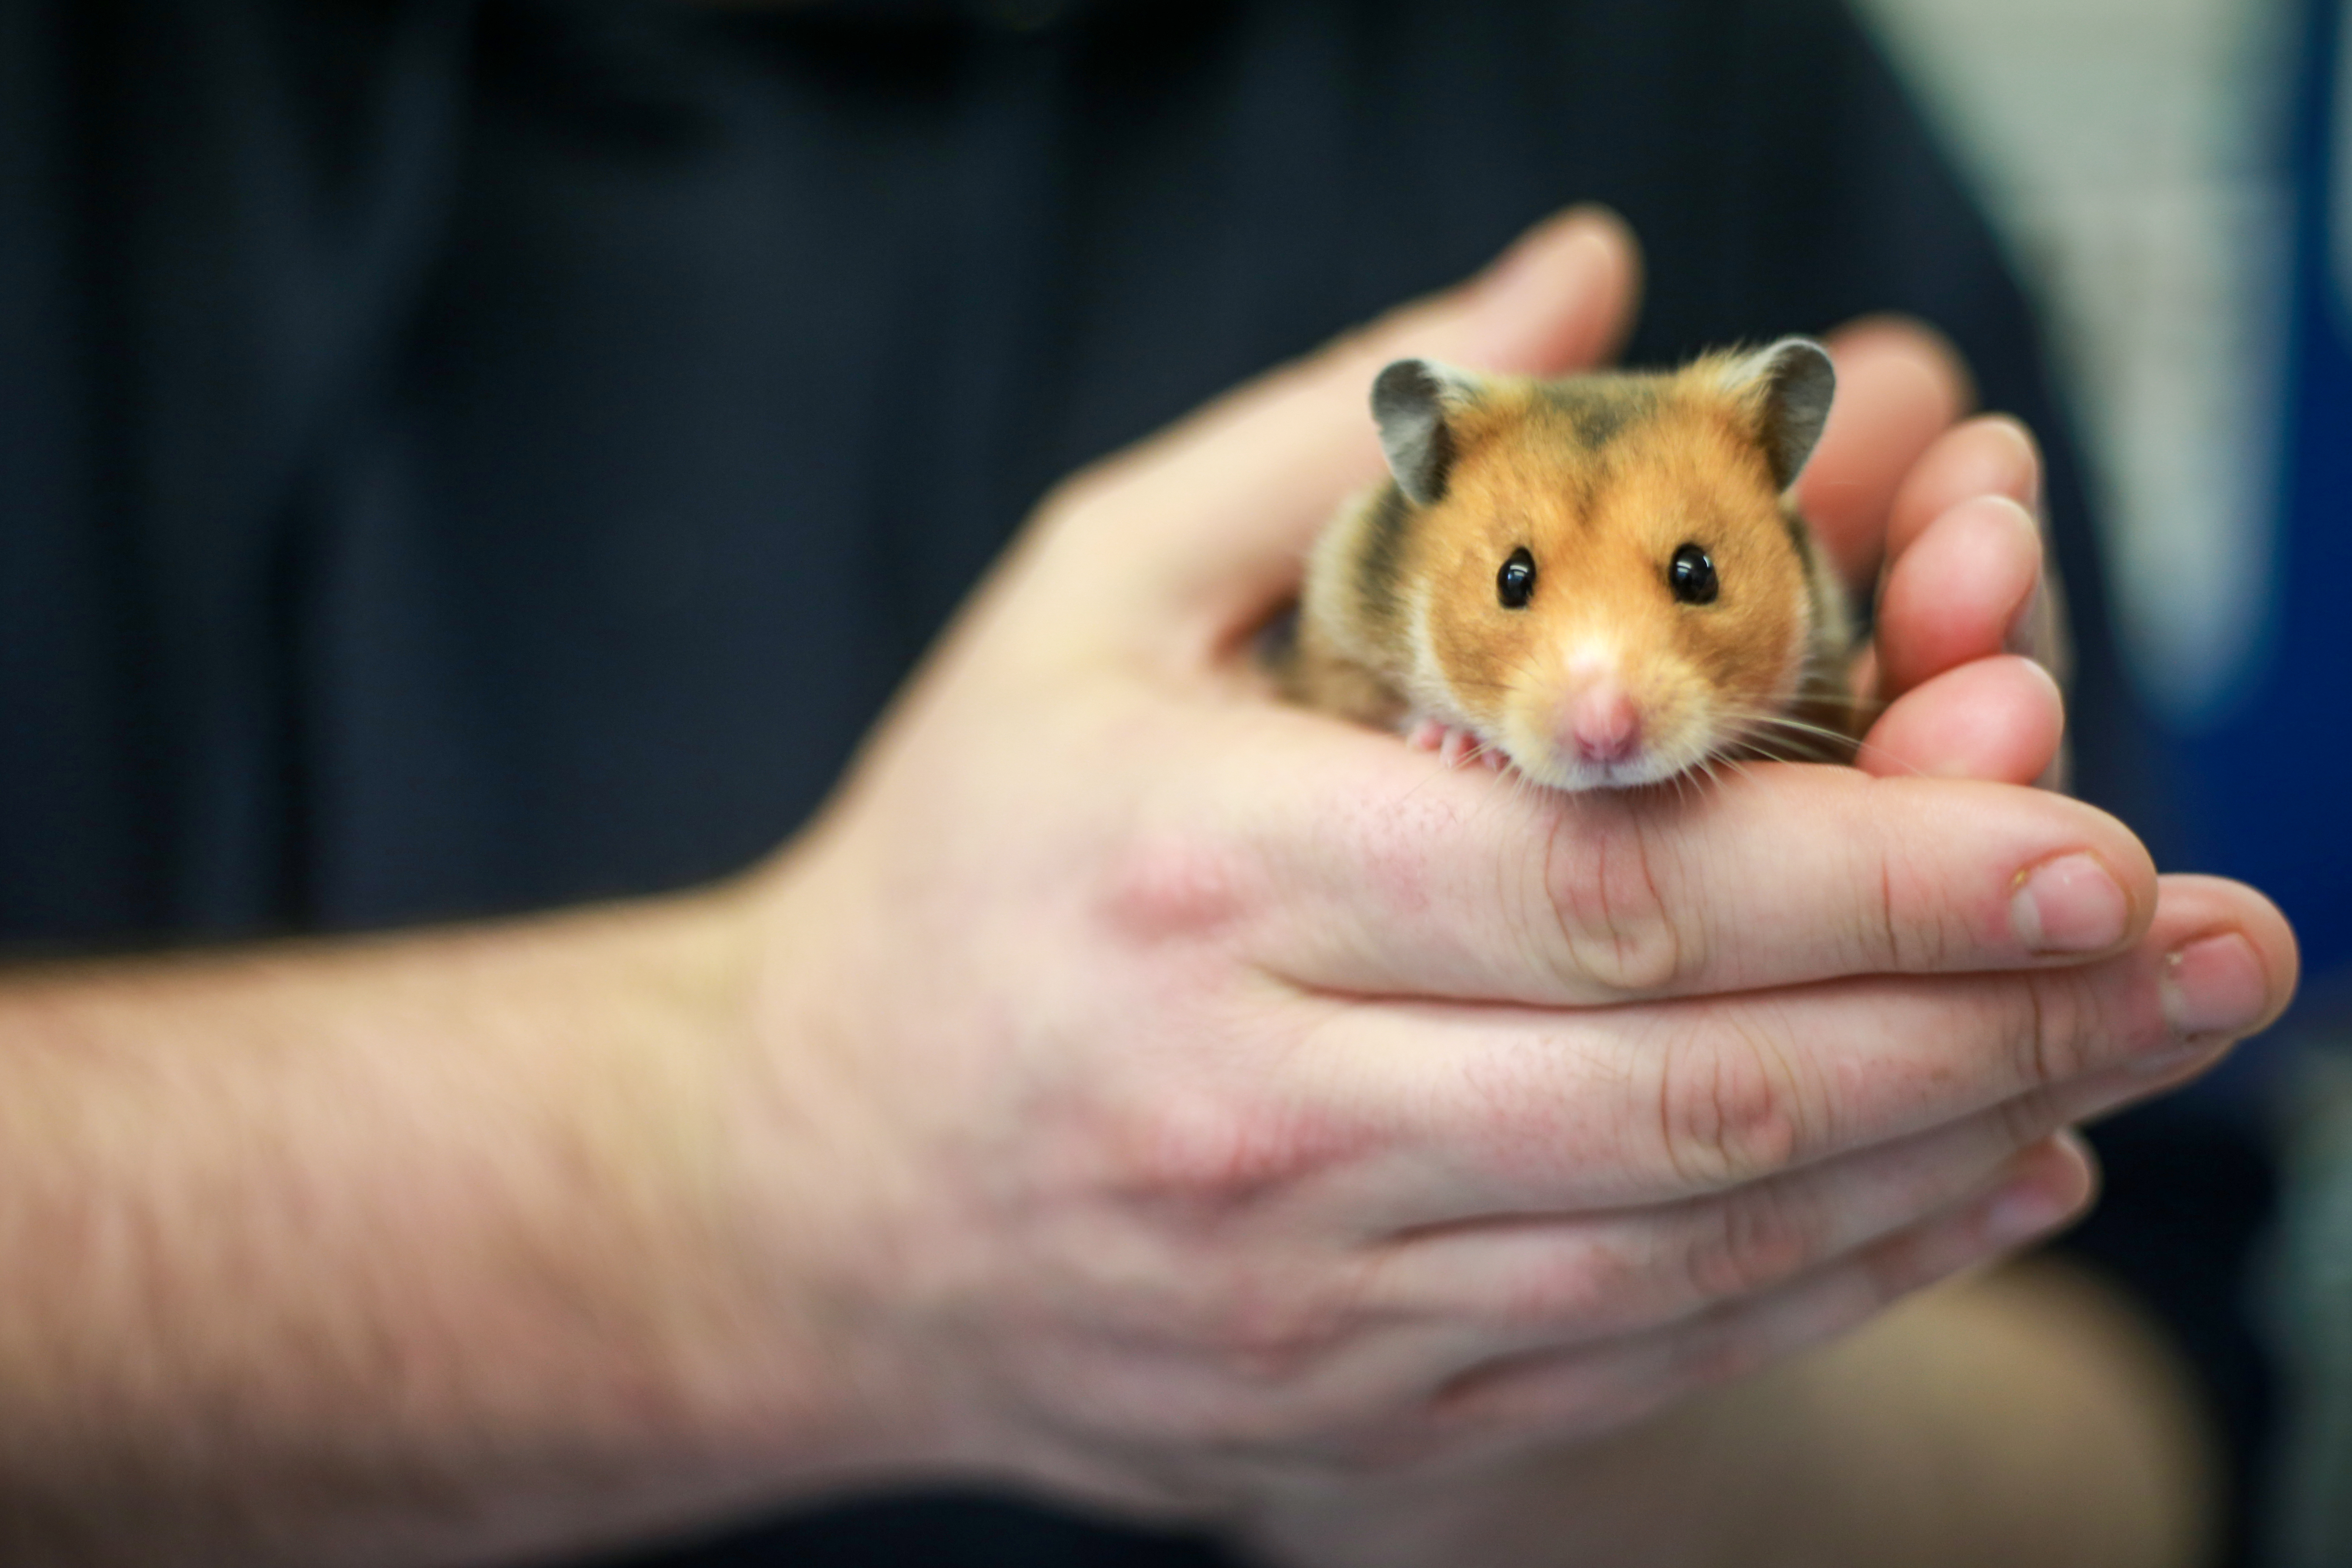 Syrian hamster being held in someone's hands